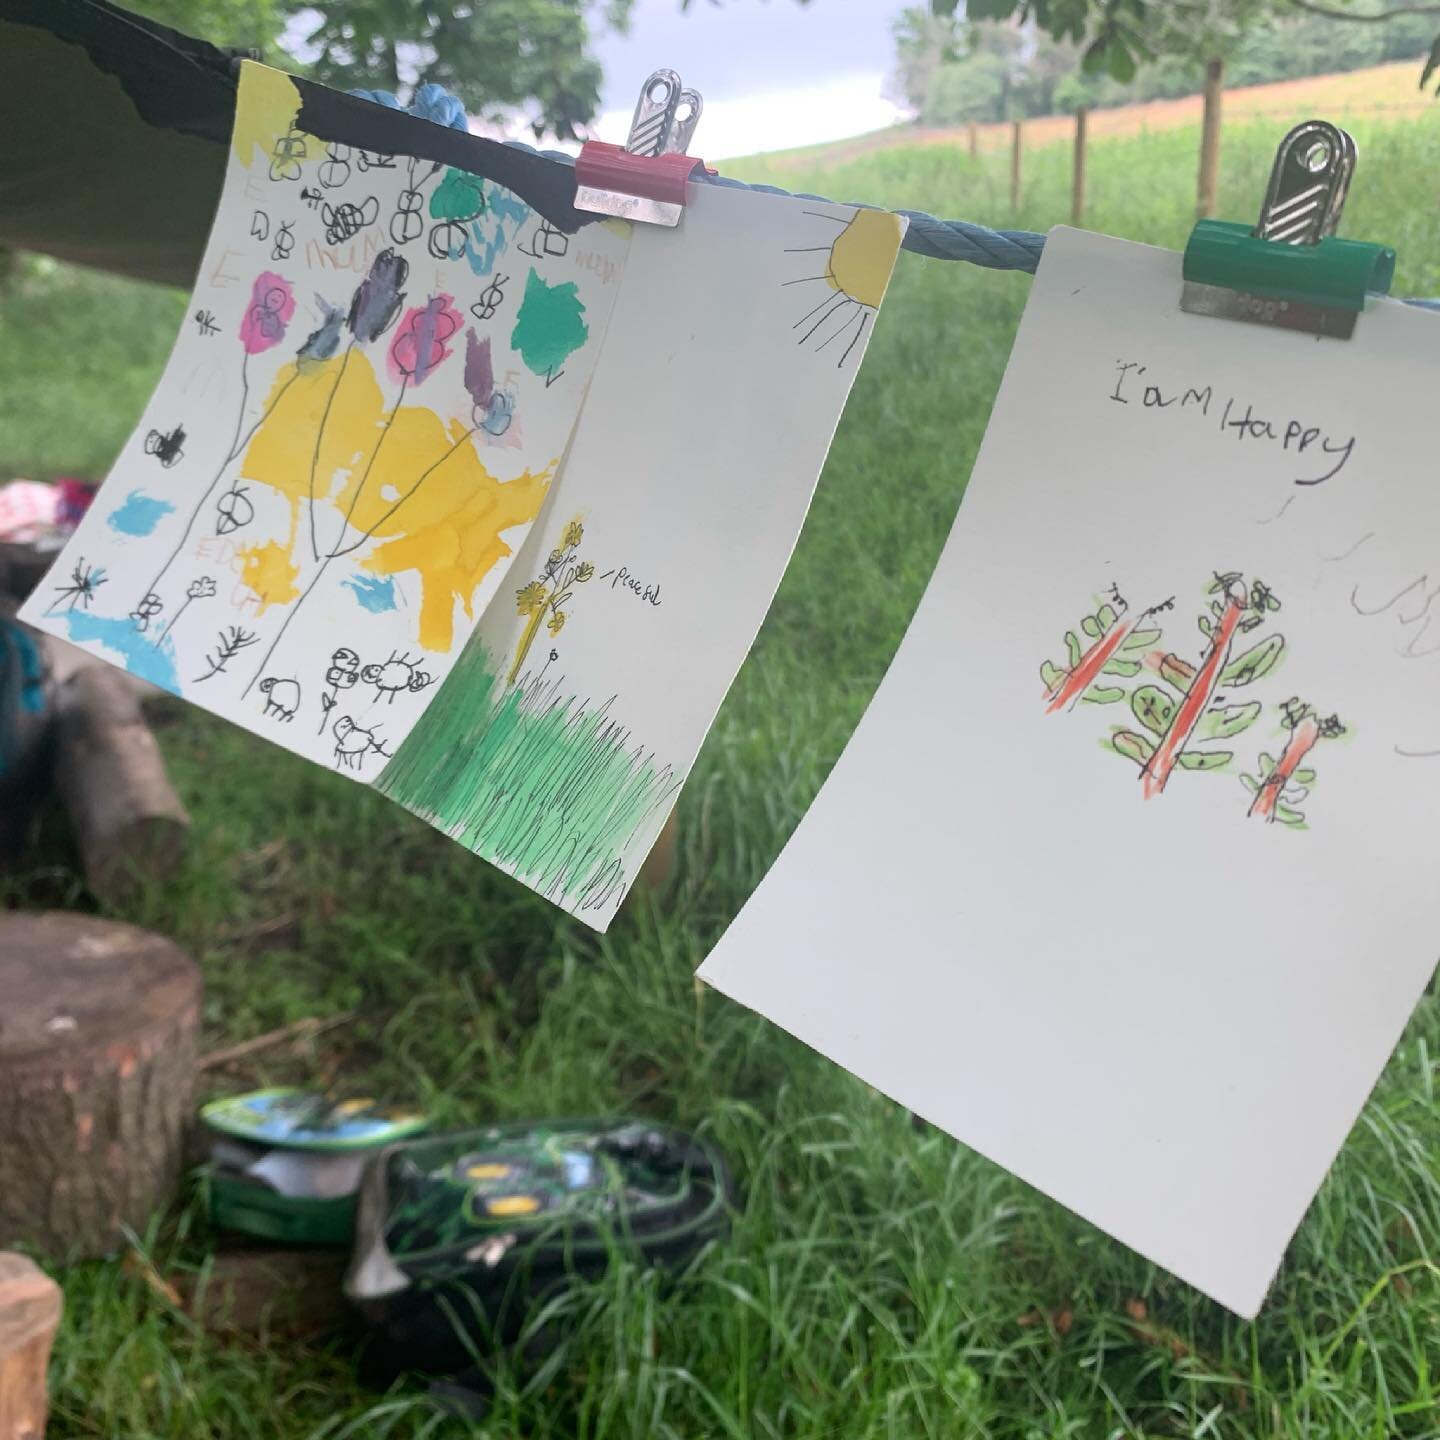 We are delighted to have hosted @theseawithinmindfulness for a children&rsquo;s art, mindfulness and yoga retreat here today. Making drawing nests in the long grass, painting affirmations, collecting wild grasses and petals for a magic potion, moment